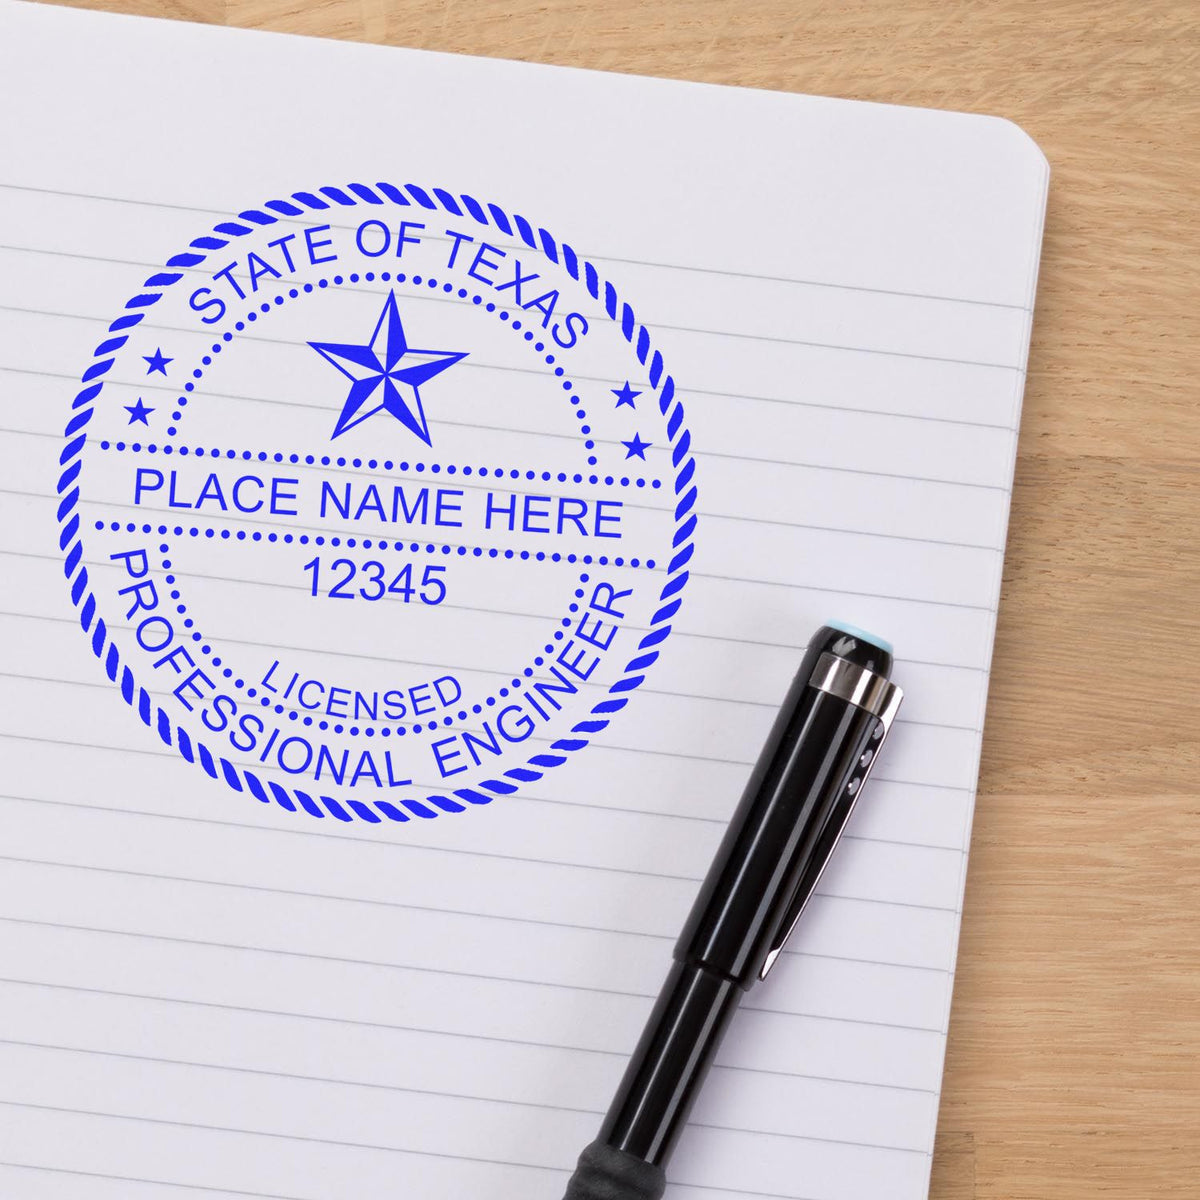 The Self-Inking Texas PE Stamp stamp impression comes to life with a crisp, detailed photo on paper - showcasing true professional quality.